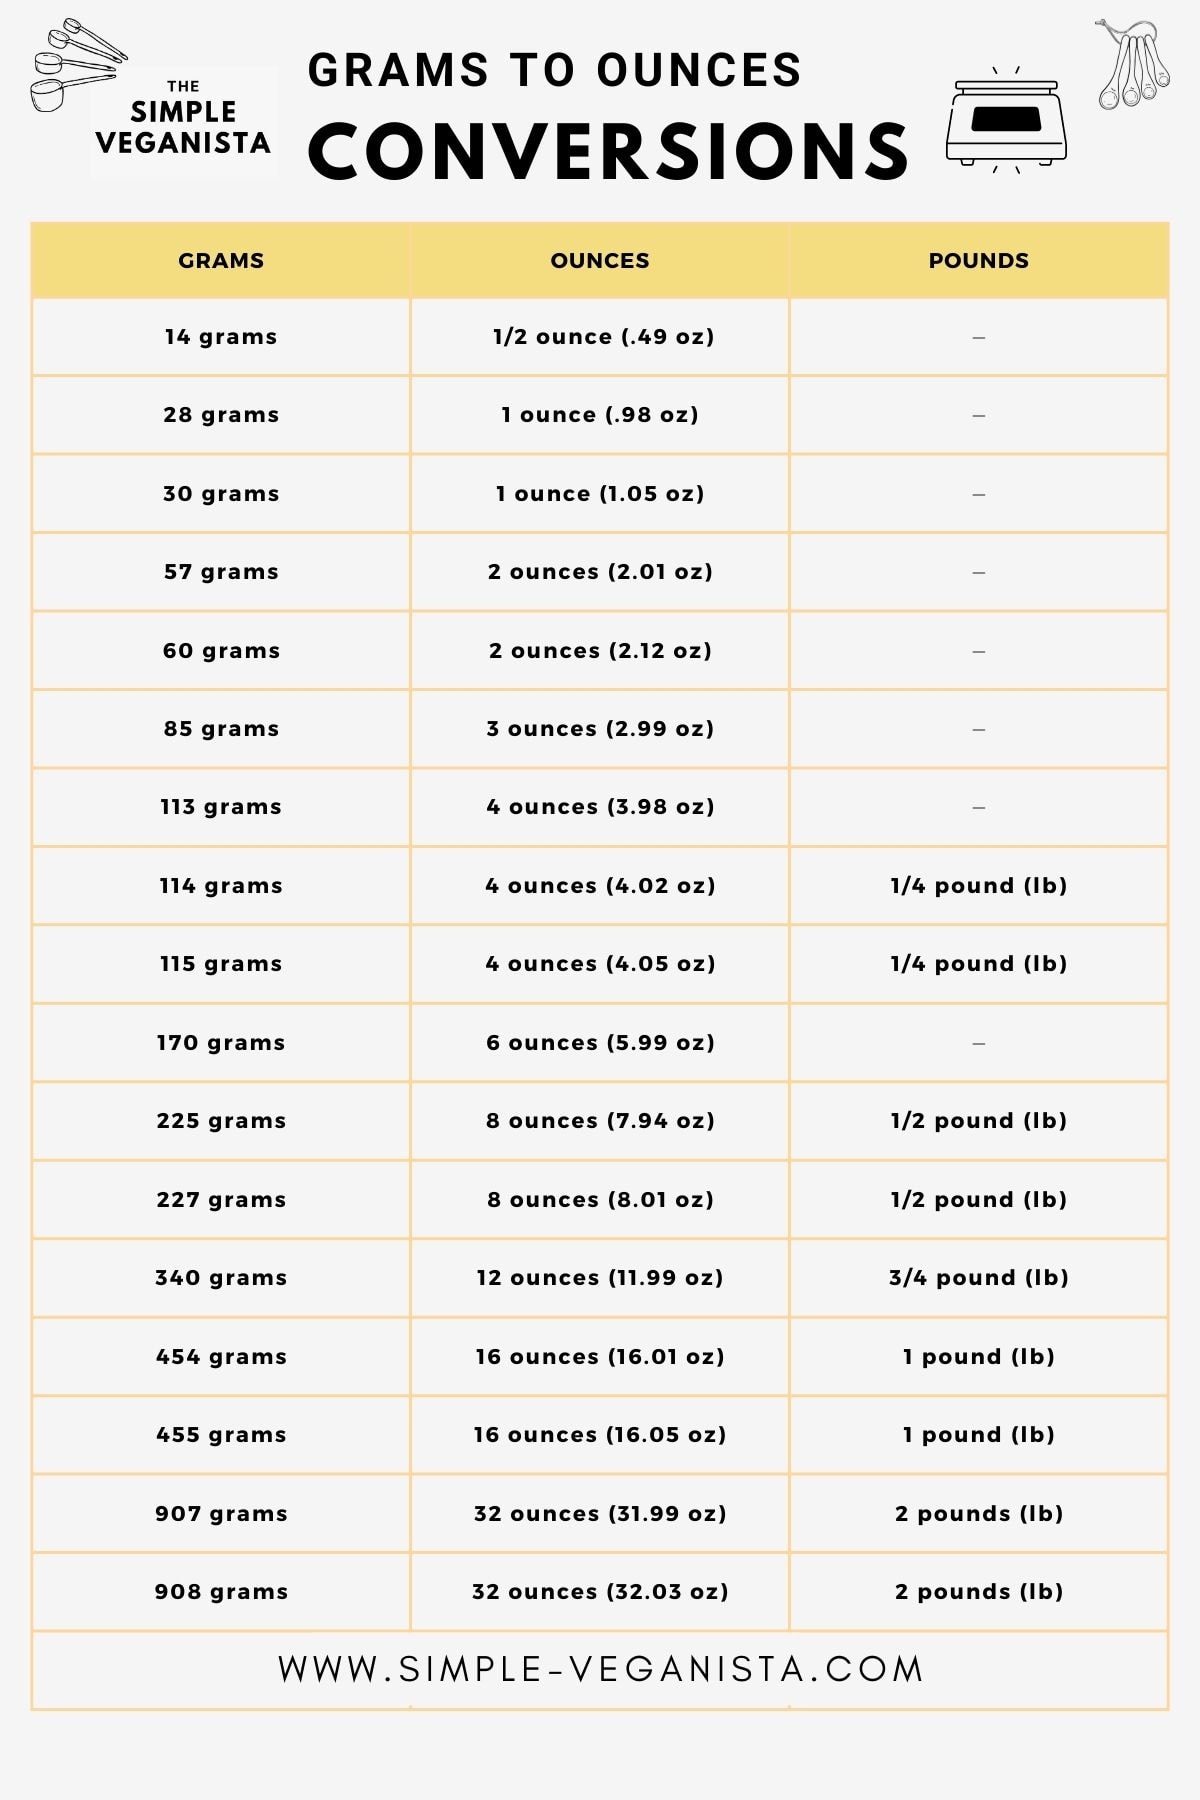 graphic conversion chart for grams to ounces.